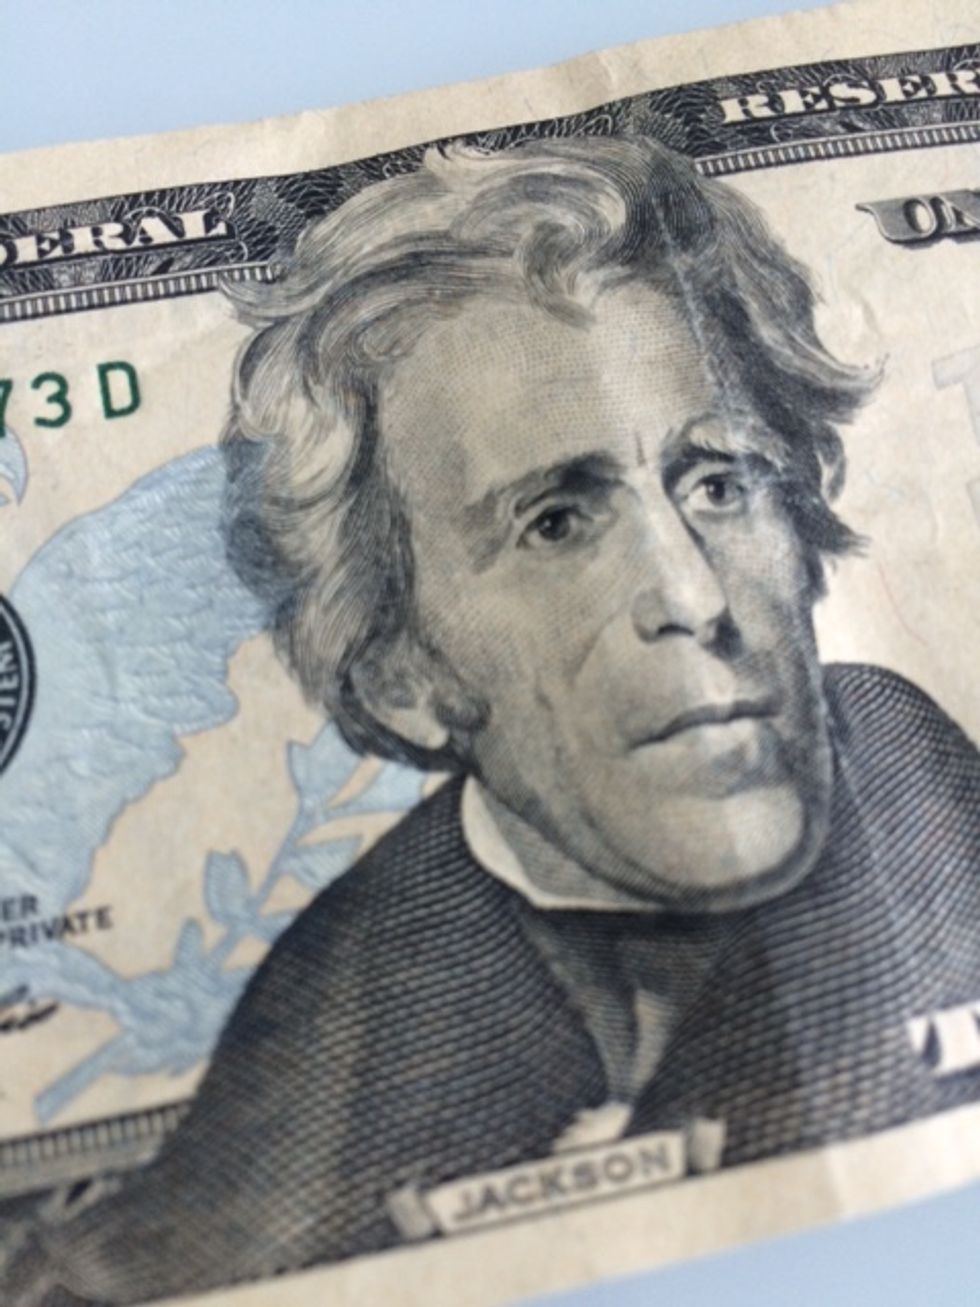 Dems propose bills aimed at kicking Andrew Jackson off the $20 bill and replacing him with a woman